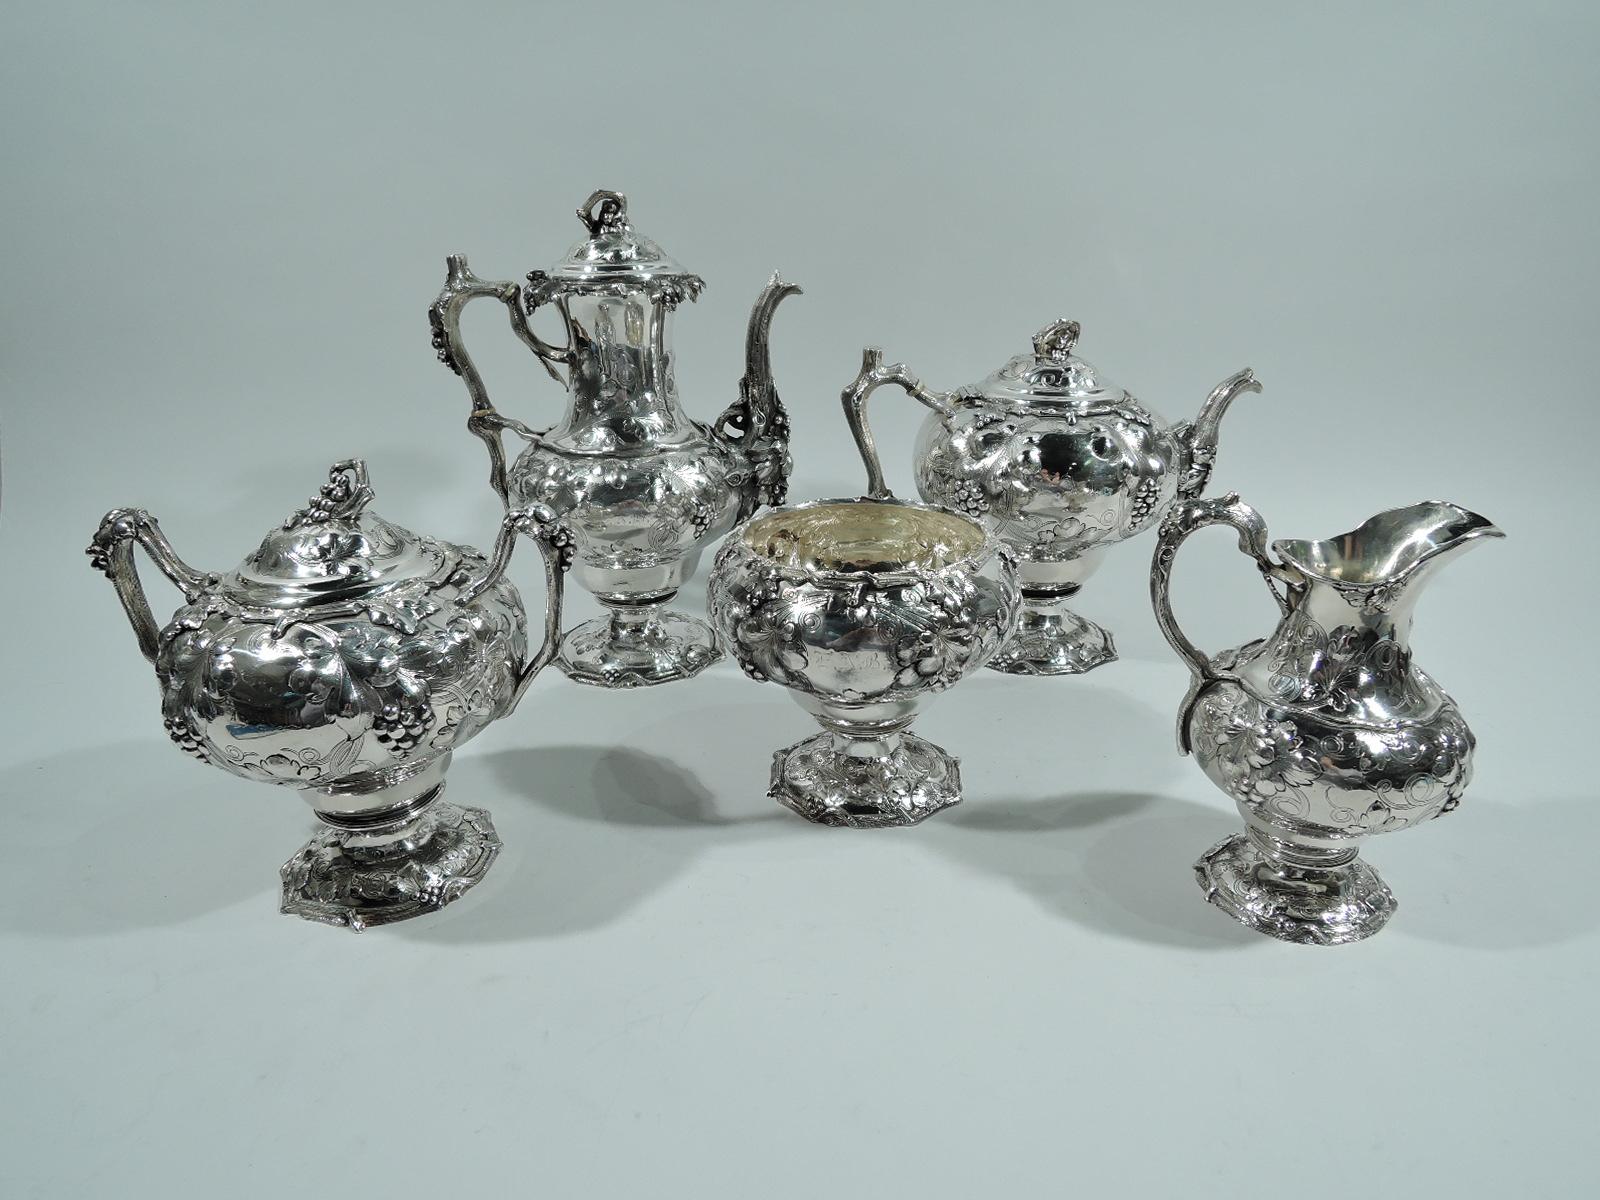 Early sterling silver coffee and tea set. Made by John C. Moore for Tiffany & Co. in New York in 1850s. This set comprises 5 pieces: coffeepot, teapot, creamer, sugar, and waste bowl. Chased and engraved grape bunches and leaves as well as vine